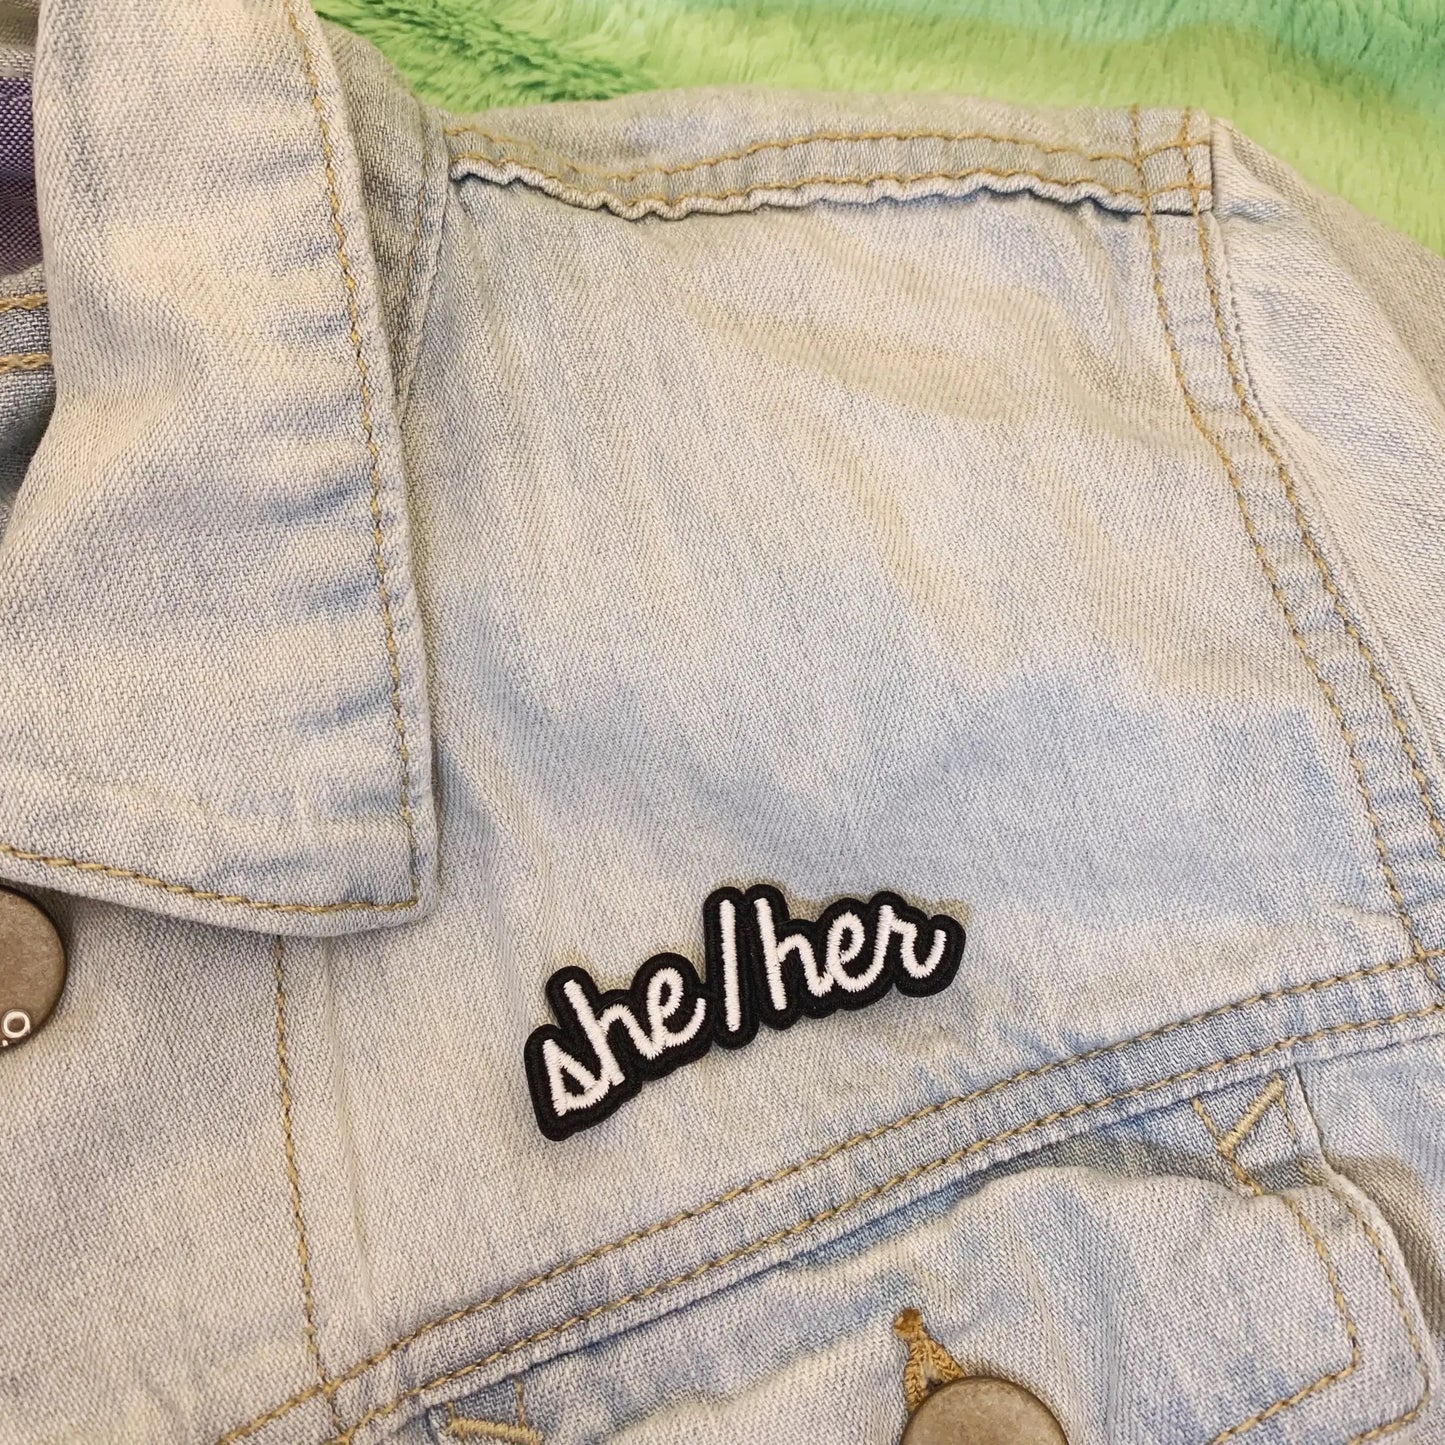 He Him Embroidered Pronoun Patch